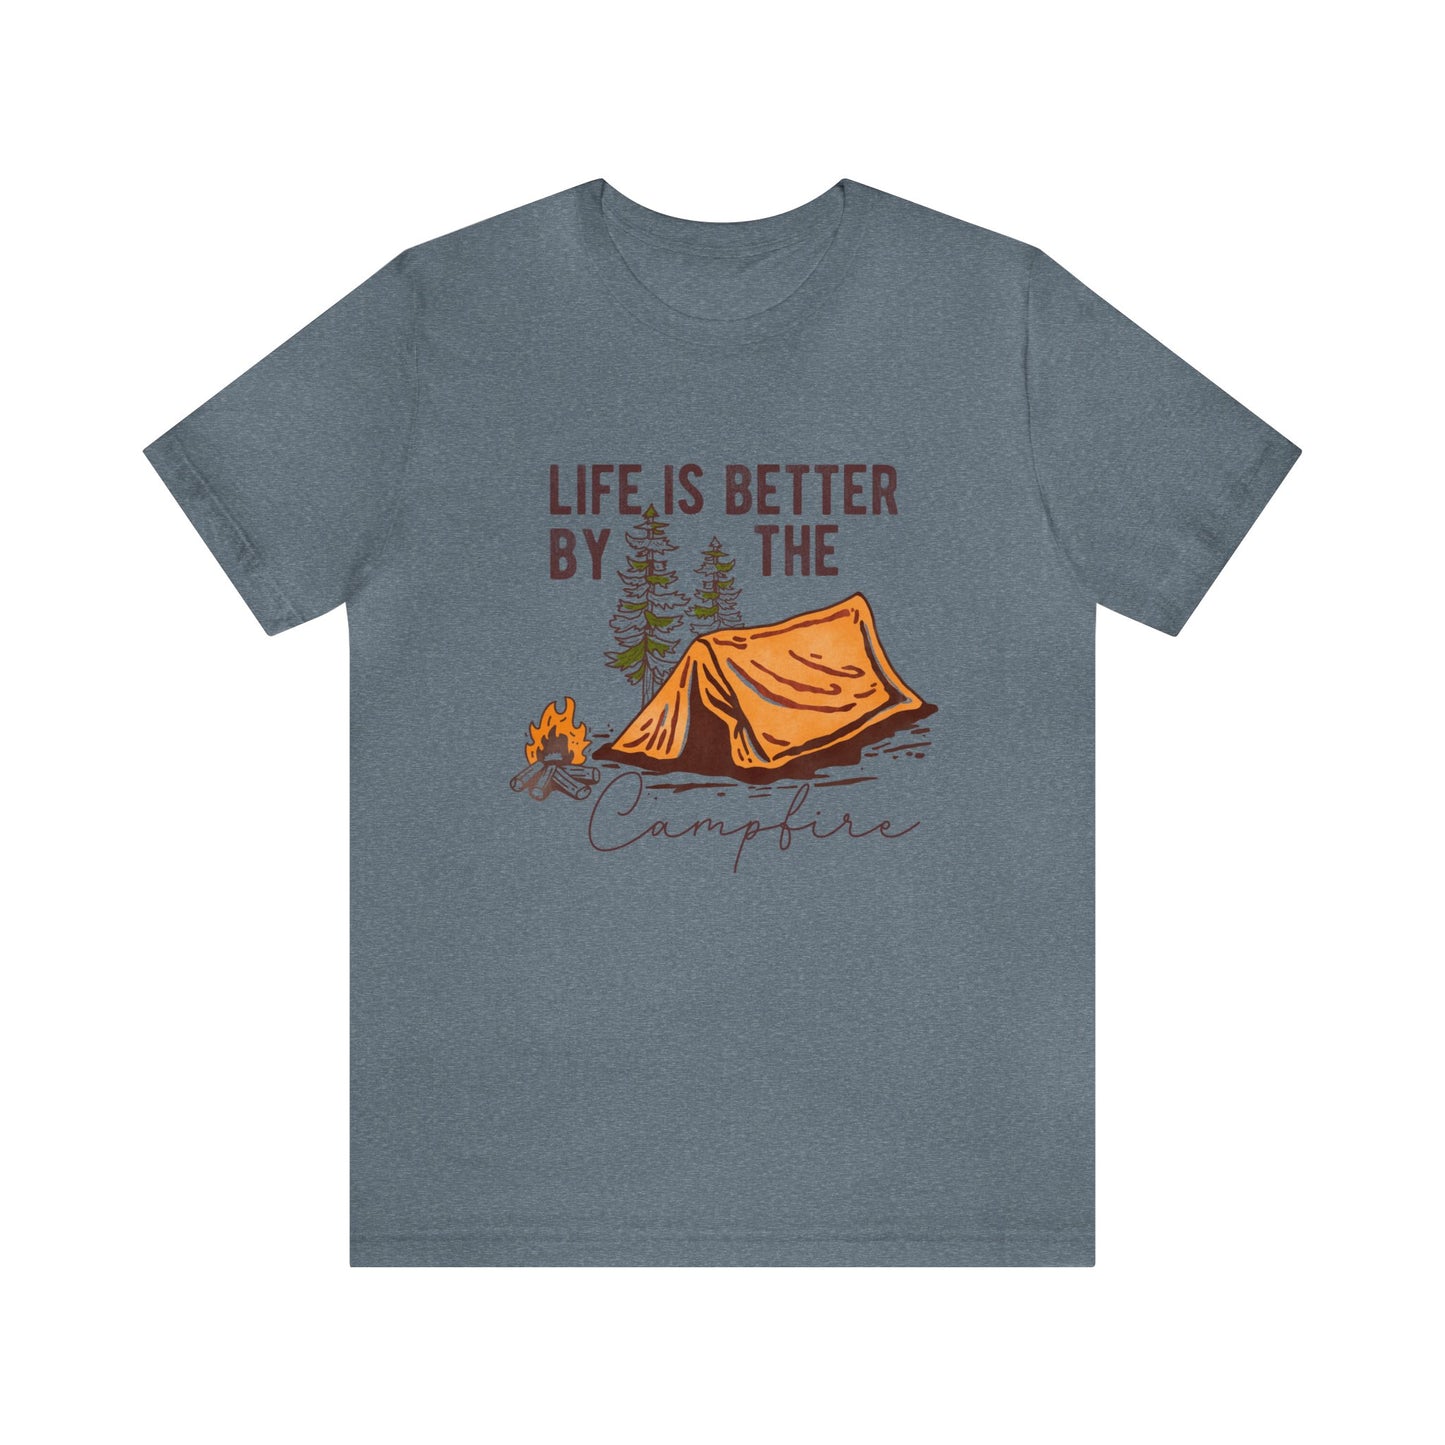 Life is better by the campfire Adult Unisex Tshirt